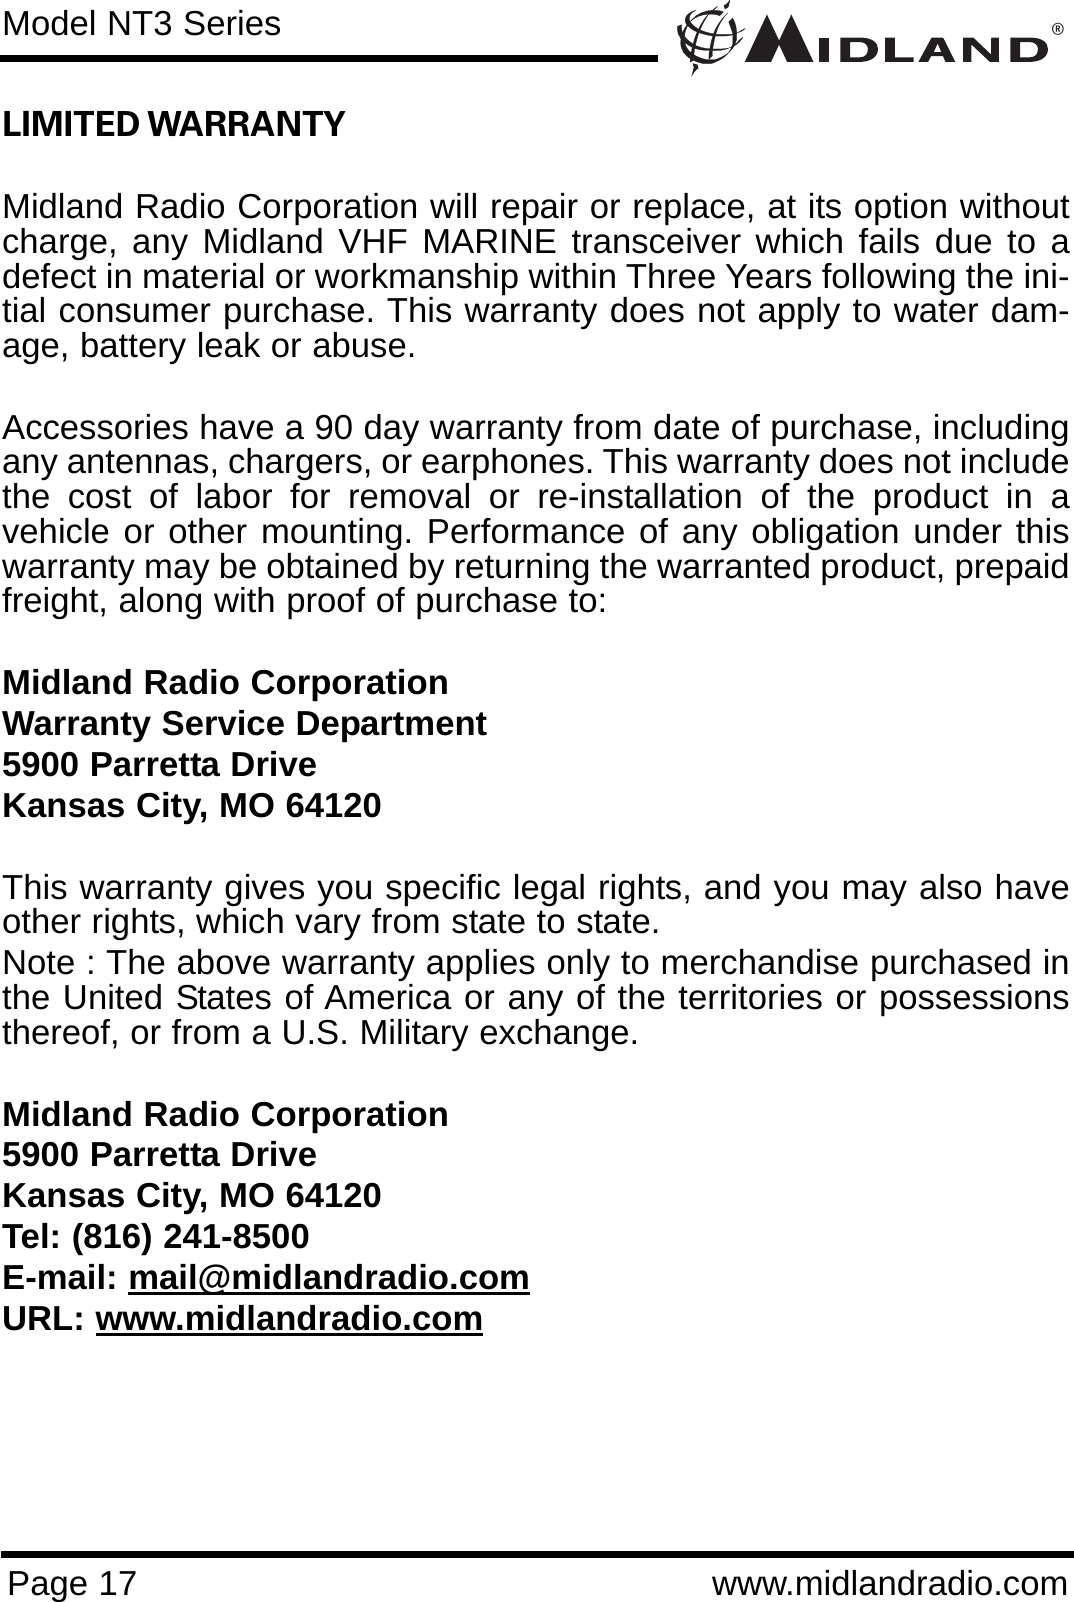 ®Page 17 www.midlandradio.comLIMITED WARRANTY Midland Radio Corporation will repair or replace, at its option withoutcharge, any Midland VHF MARINE transceiver which fails due to adefect in material or workmanship within Three Years following the ini-tial consumer purchase. This warranty does not apply to water dam-age, battery leak or abuse.Accessories have a 90 day warranty from date of purchase, includingany antennas, chargers, or earphones. This warranty does not includethe cost of labor for removal or re-installation of the product in avehicle or other mounting. Performance of any obligation under thiswarranty may be obtained by returning the warranted product, prepaidfreight, along with proof of purchase to:Midland Radio CorporationWarranty Service Department5900 Parretta DriveKansas City, MO 64120This warranty gives you specific legal rights, and you may also haveother rights, which vary from state to state.Note : The above warranty applies only to merchandise purchased inthe United States of America or any of the territories or possessionsthereof, or from a U.S. Military exchange.Midland Radio Corporation5900 Parretta DriveKansas City, MO 64120Tel: (816) 241-8500E-mail: mail@midlandradio.comURL: www.midlandradio.comModel NT3 Series